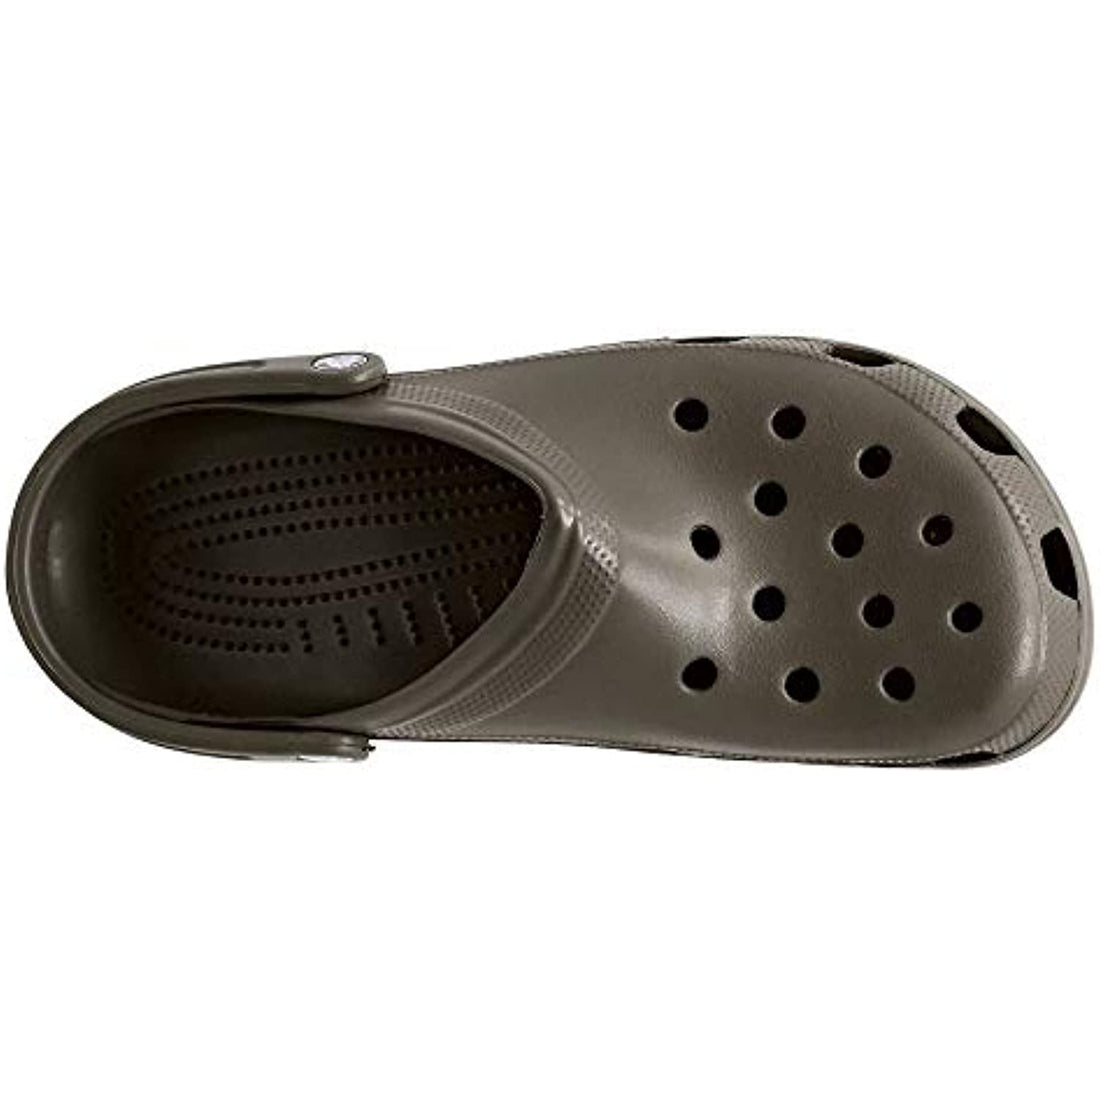 Crocs Unisex-Adult Classic Clog (Retired Colors) | Slip on Water Shoes